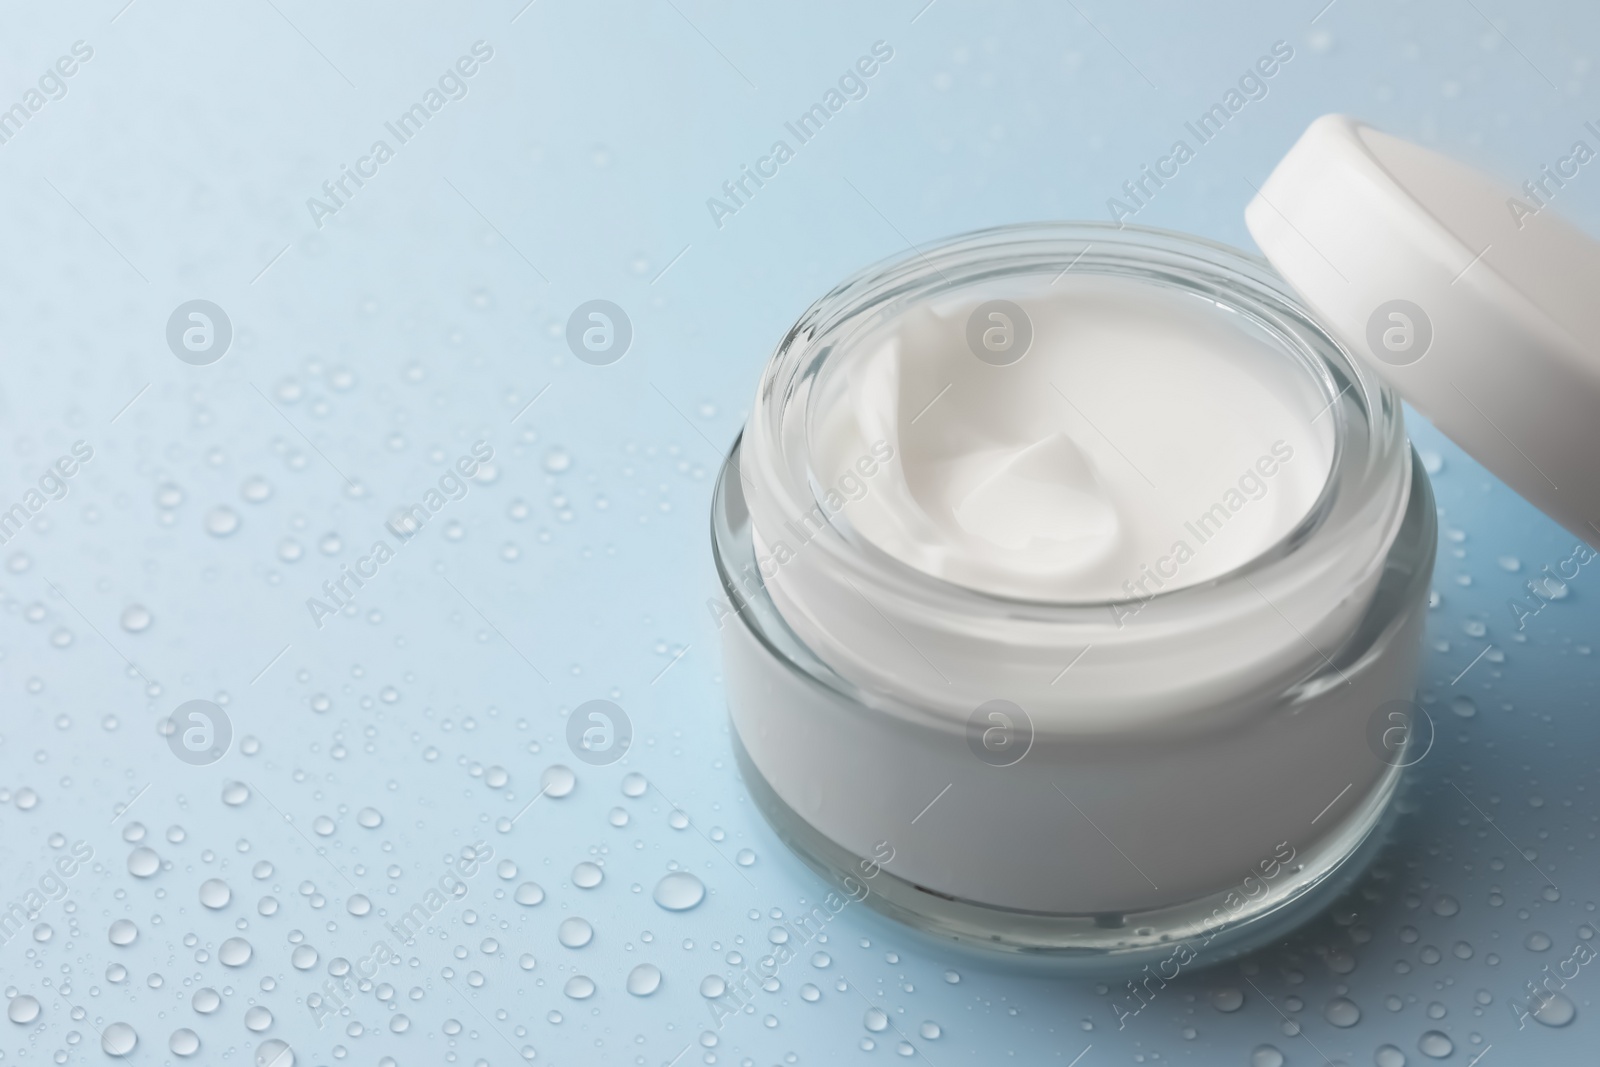 Photo of Jar of face cream on light blue surface covered with water drops, space for text